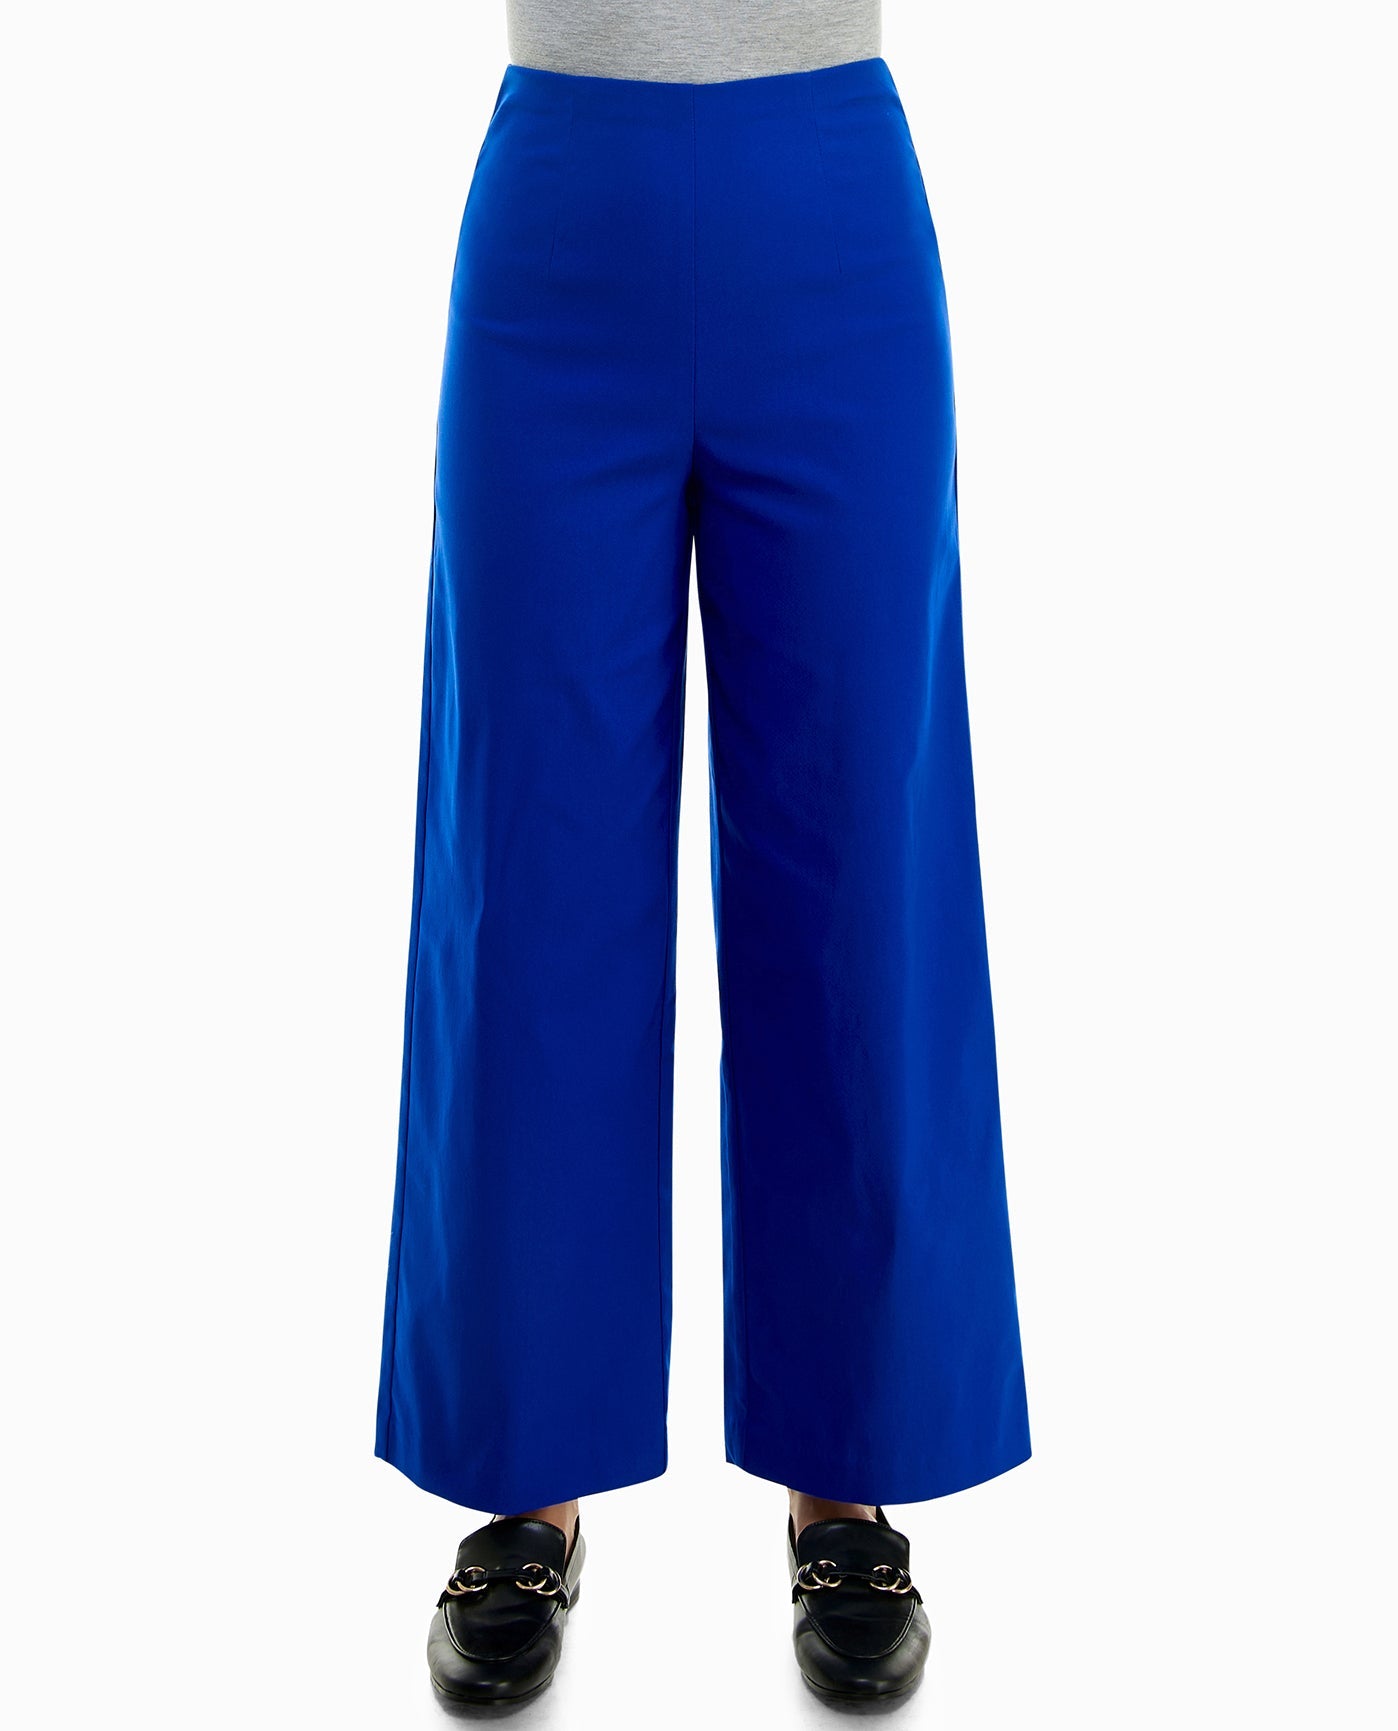 Designer Elegant Womens Pants Capris Lion Head Button Wide Leg Trousers  Casual Fashion Ruwnay Party Clothing From Whenever1808, $38.23 | DHgate.Com